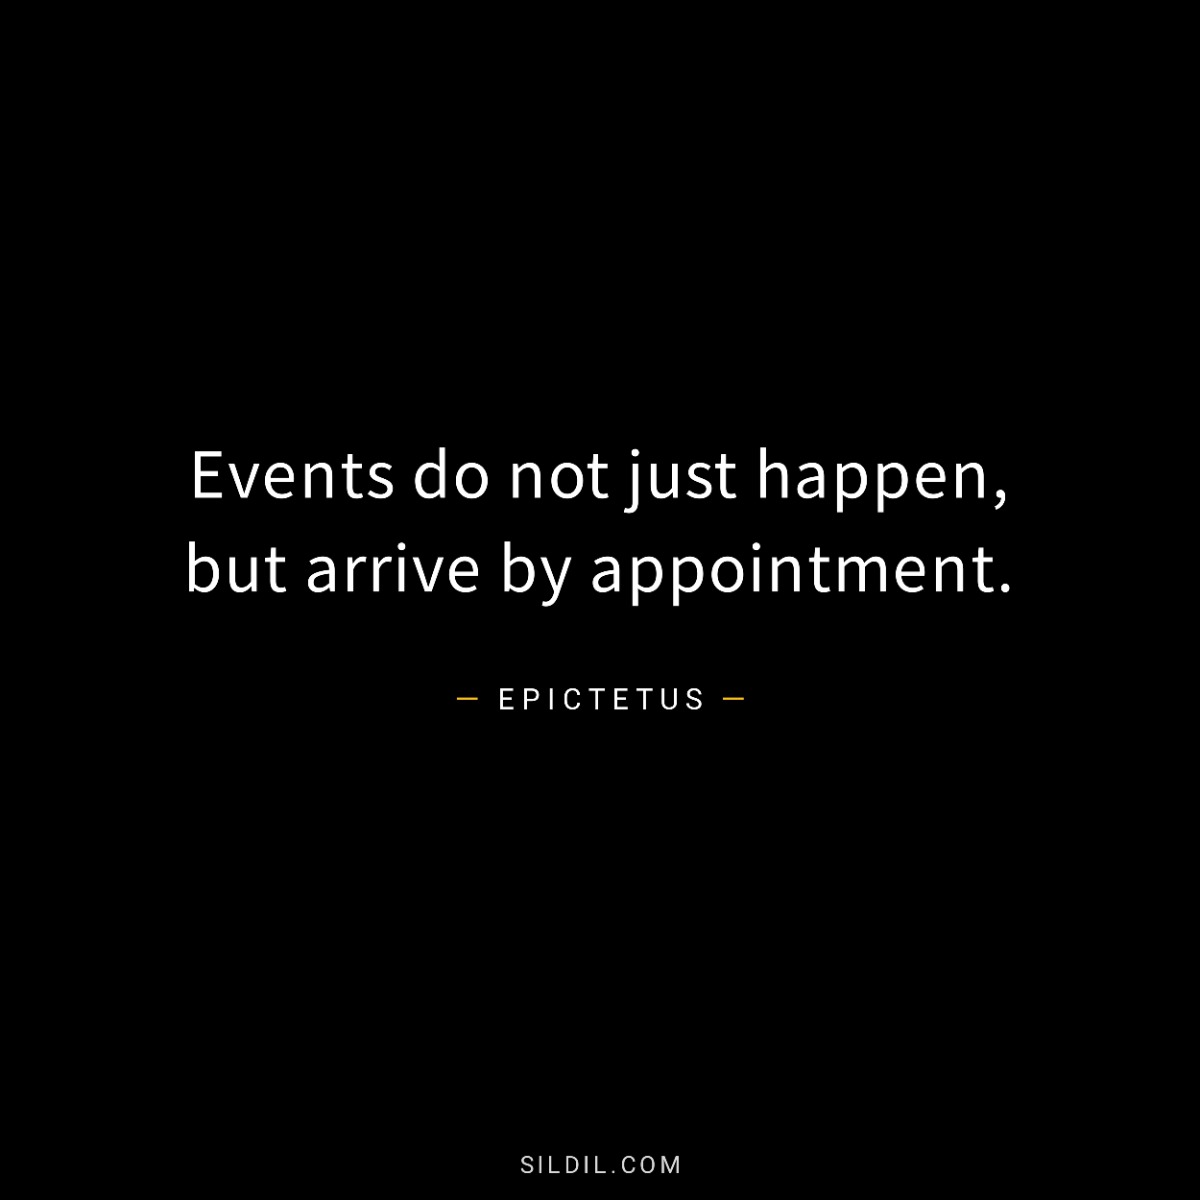 Events do not just happen, but arrive by appointment.